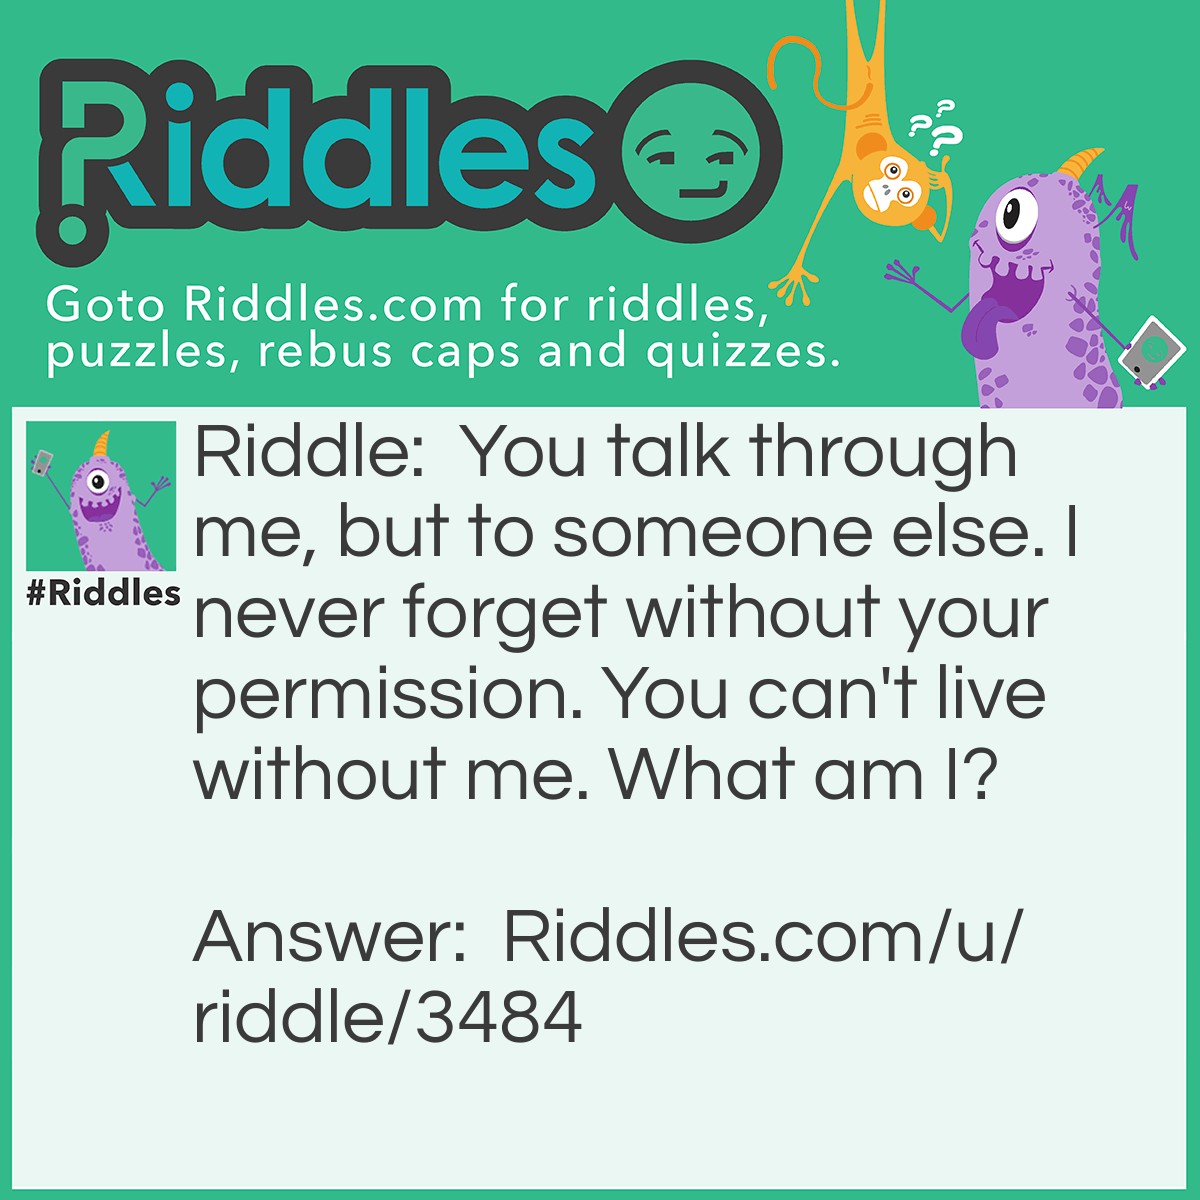 Riddle: You talk through me, but to someone else. I never forget without your permission. You can't live without me. What am I? Answer: Your cell phone.